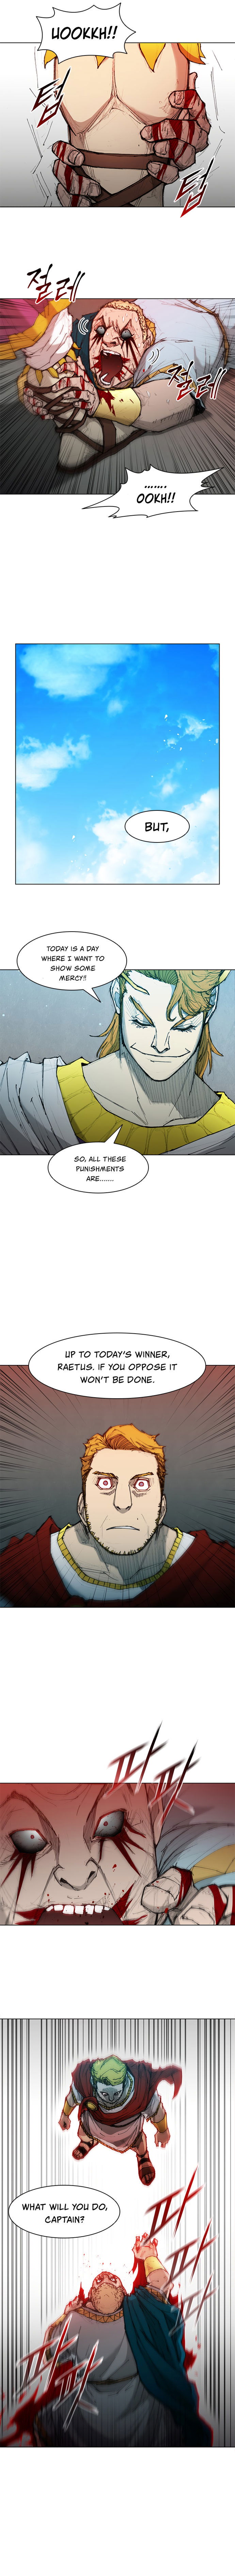 long-way-of-the-warrior-chap-45-4